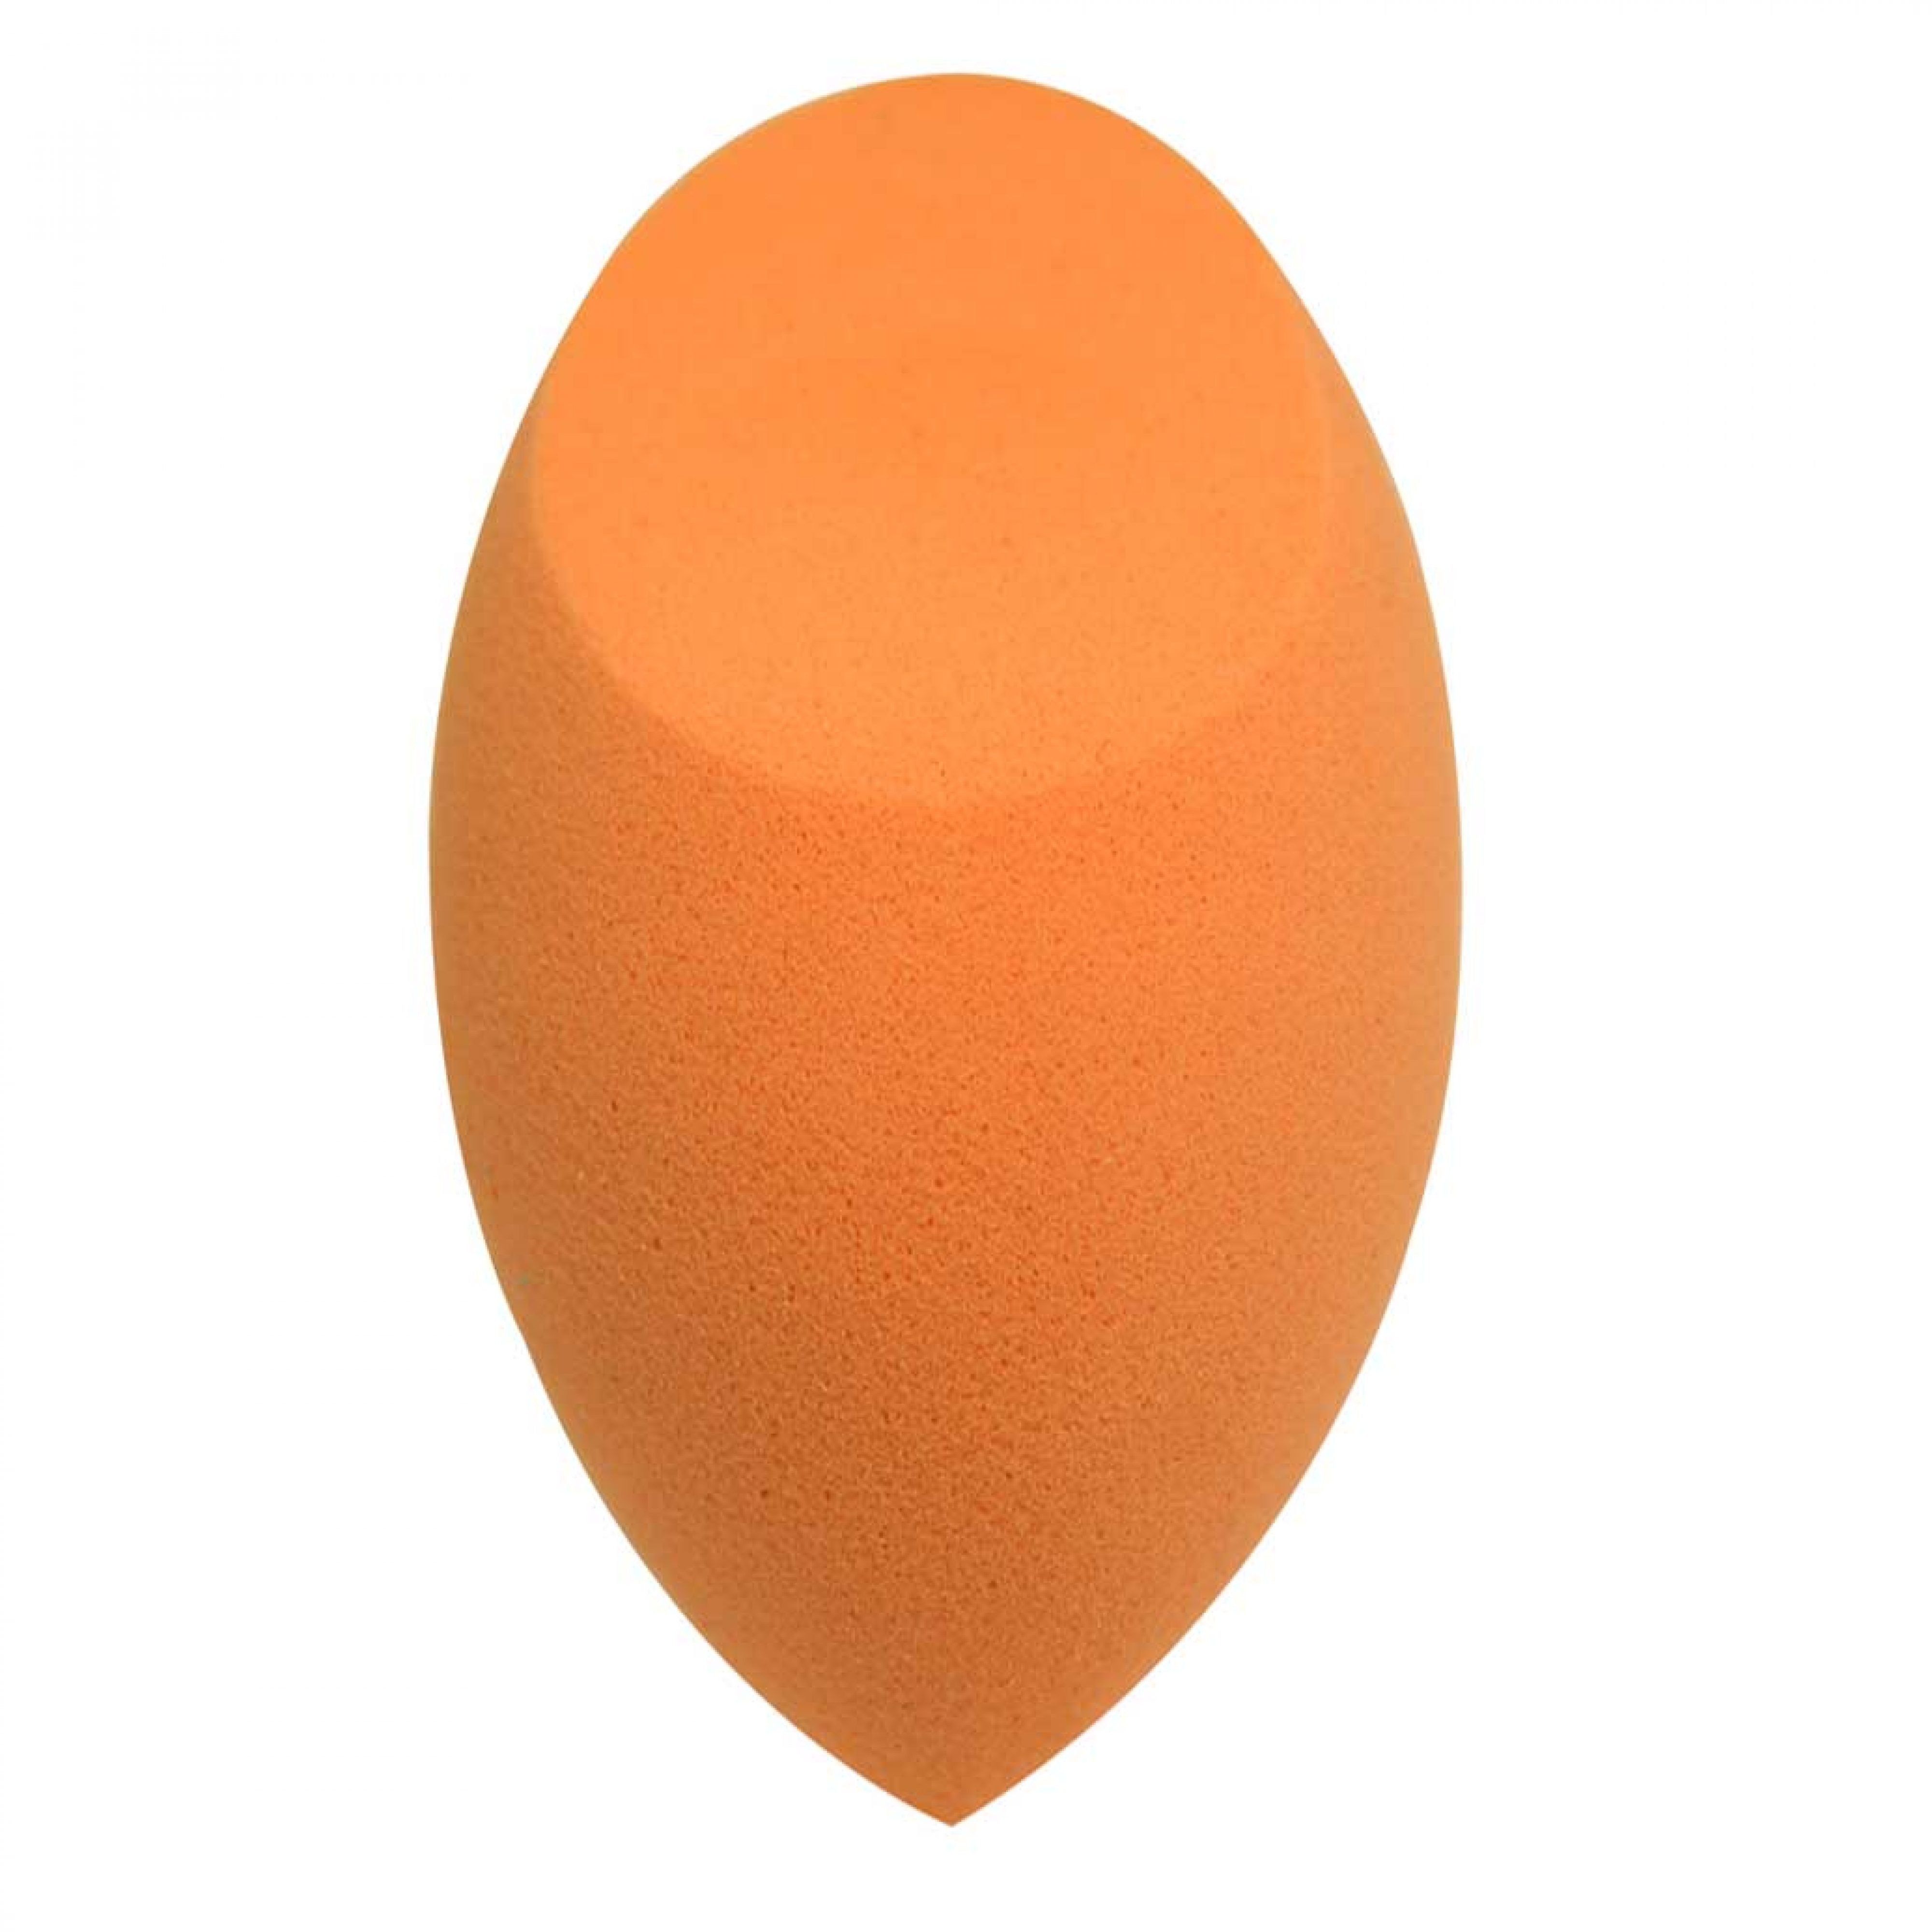 Real Techniques Miracle Complexion Sponge is a Must Have!